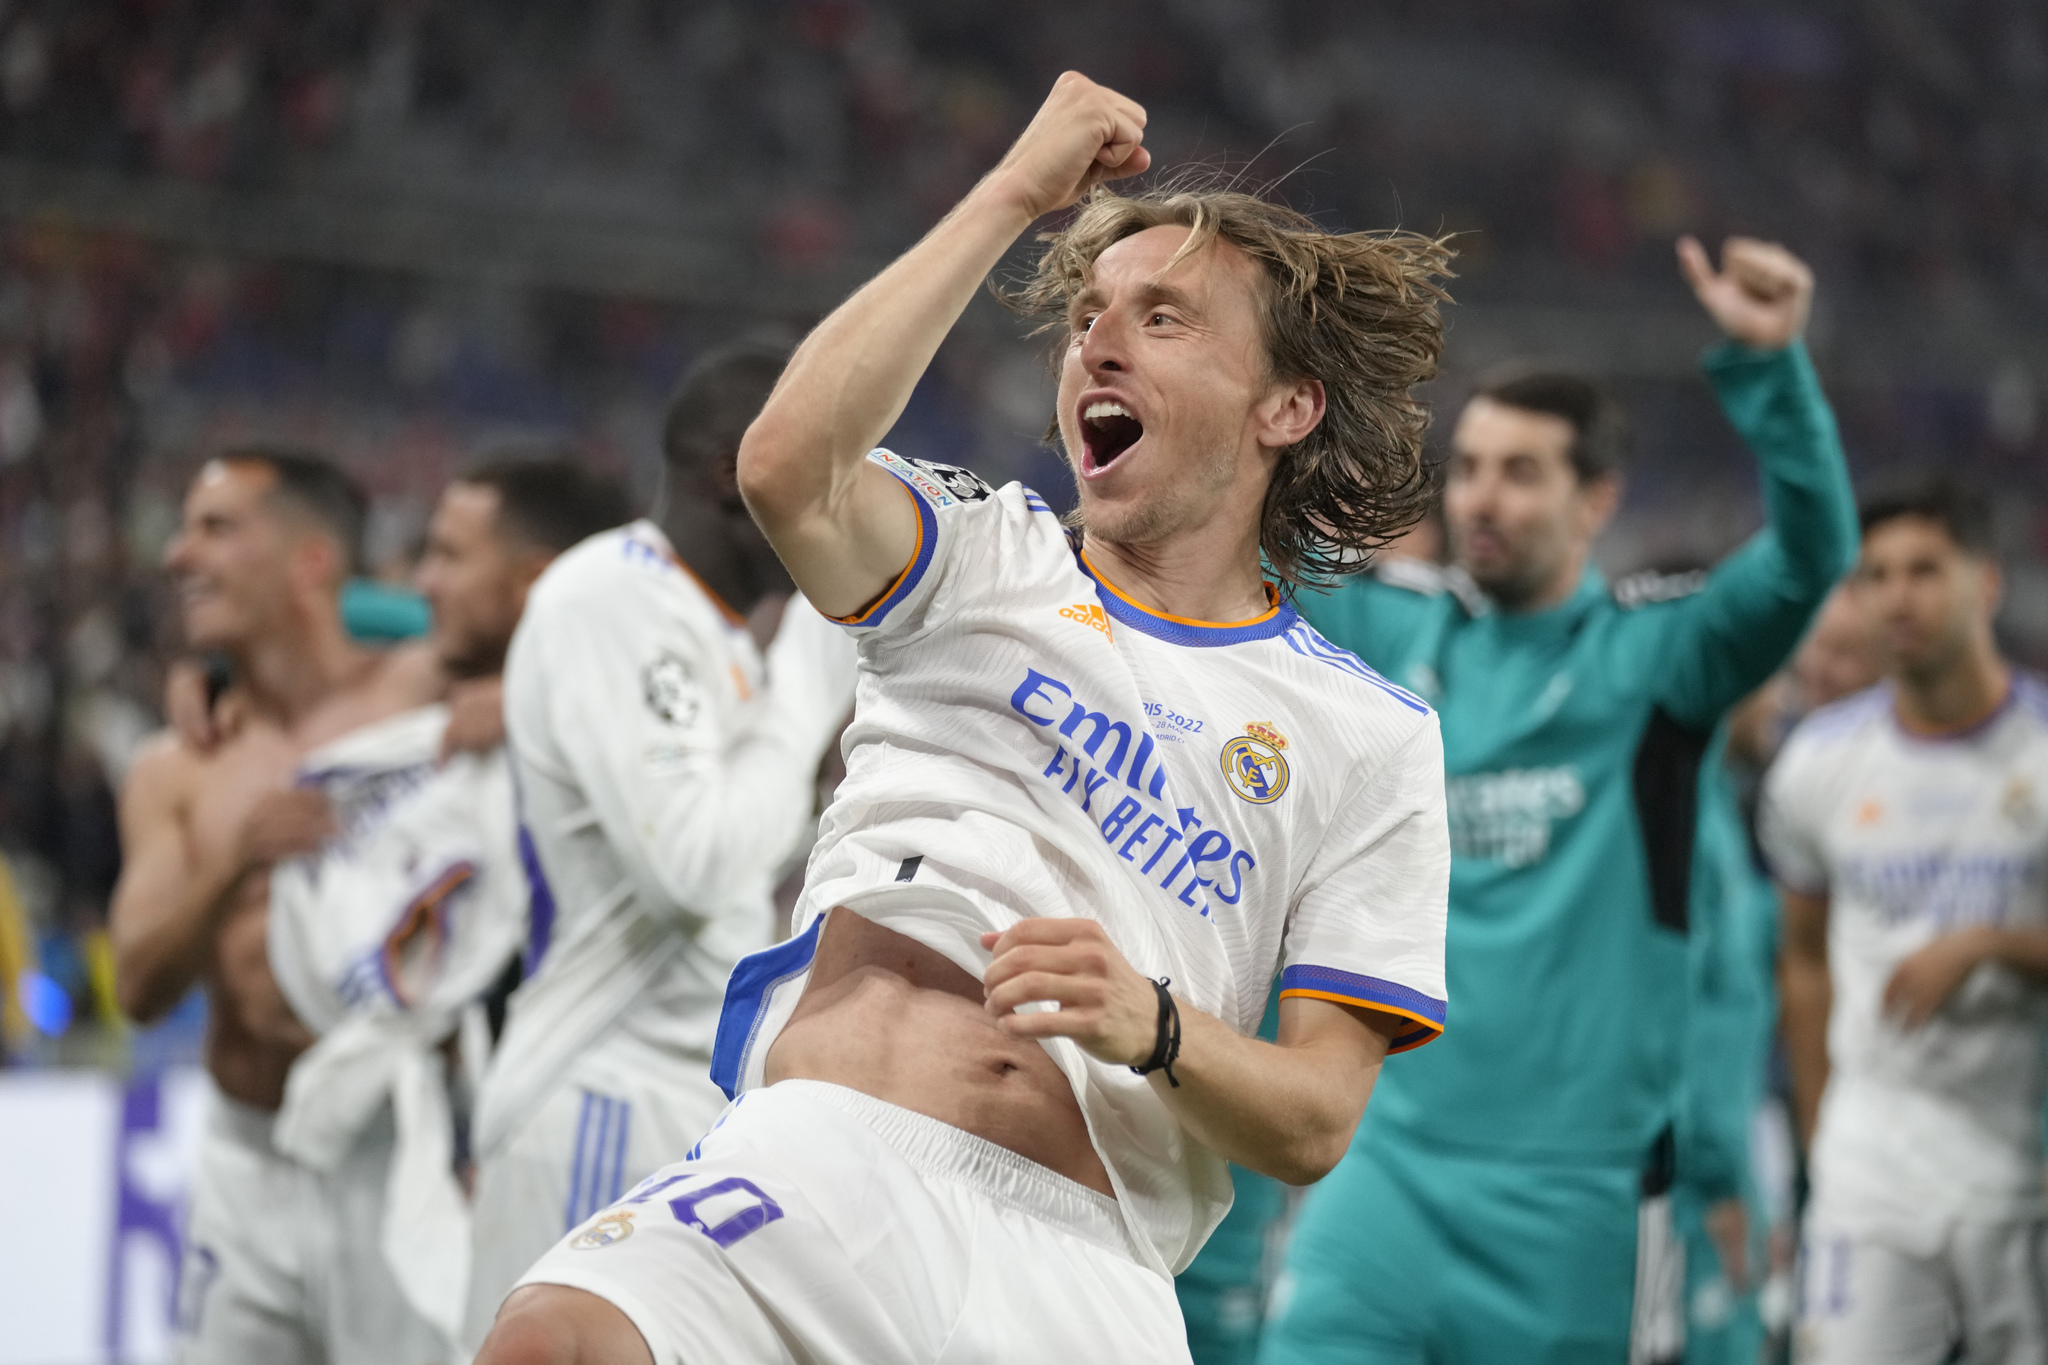 Real Madrid's Luka Modric celebrates winning the  lt;HIT gt;Champions lt;/HIT gt;  lt;HIT gt;League lt;/HIT gt; final soccer match between Liverpool and Real Madrid at the Stade de France in Saint Denis near Paris, Saturday, May 28, 2022. Real Madrid won 1-0. (AP Photo/Kirsty Wigglesworth)